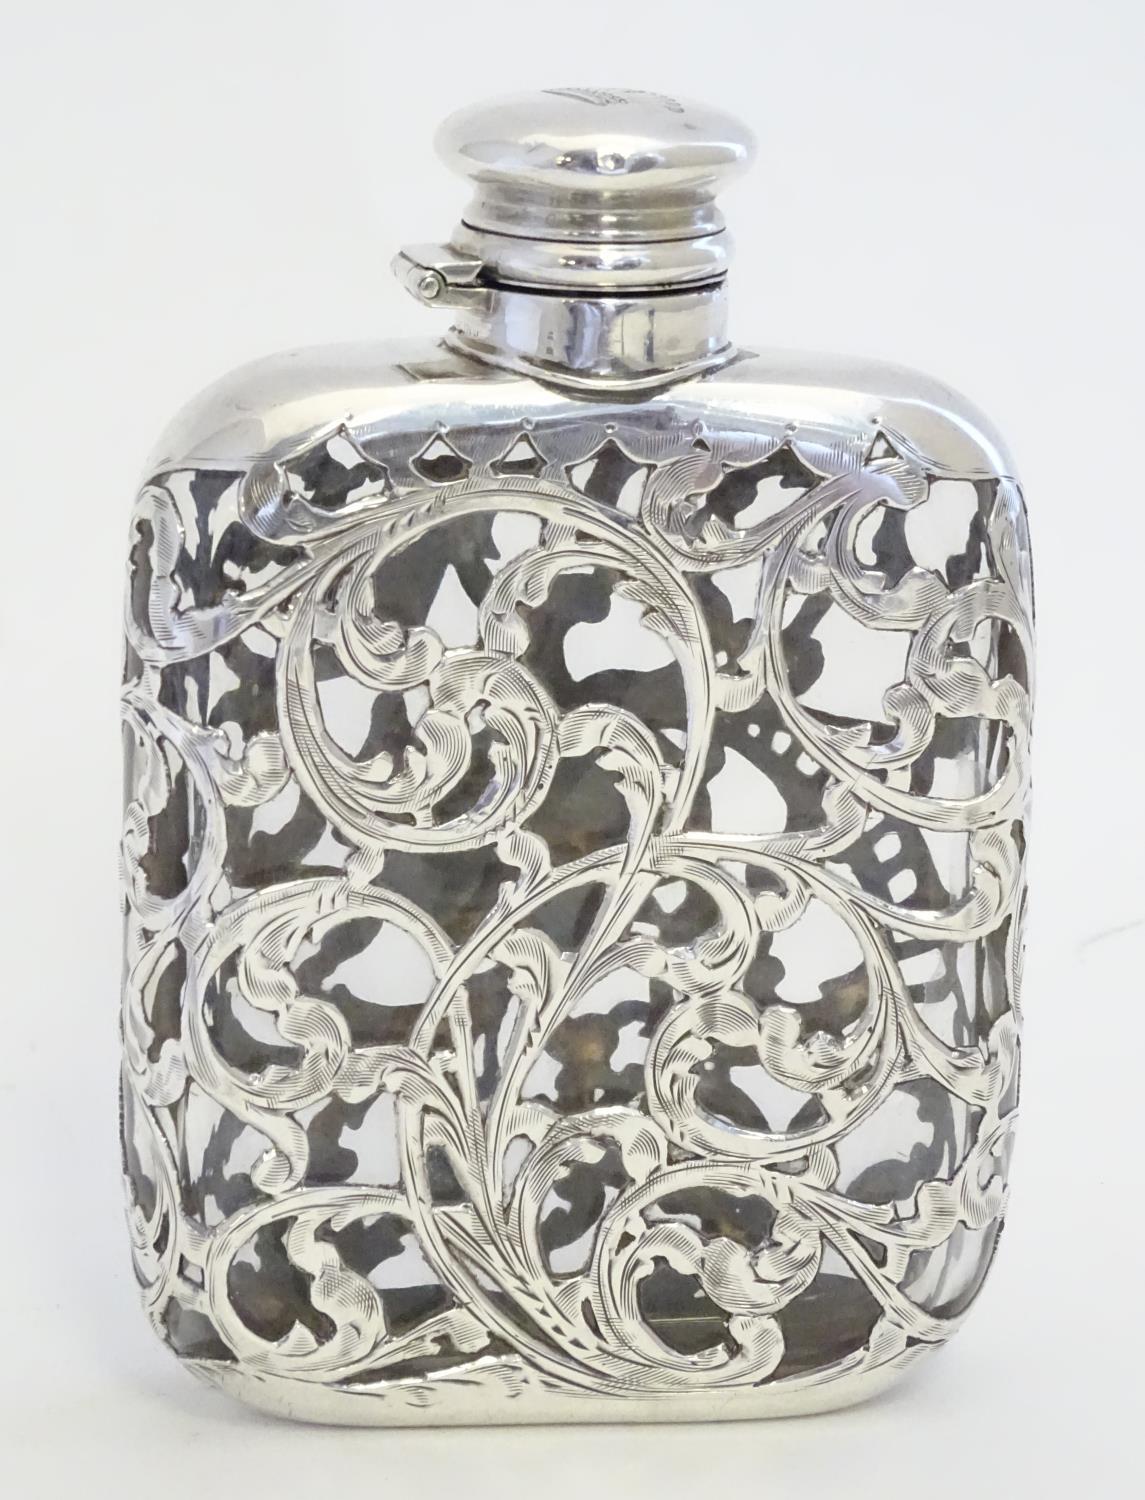 A Victorian hip flask, the glass flask with ornate silver mounts with acanthus scroll detail - Image 7 of 7